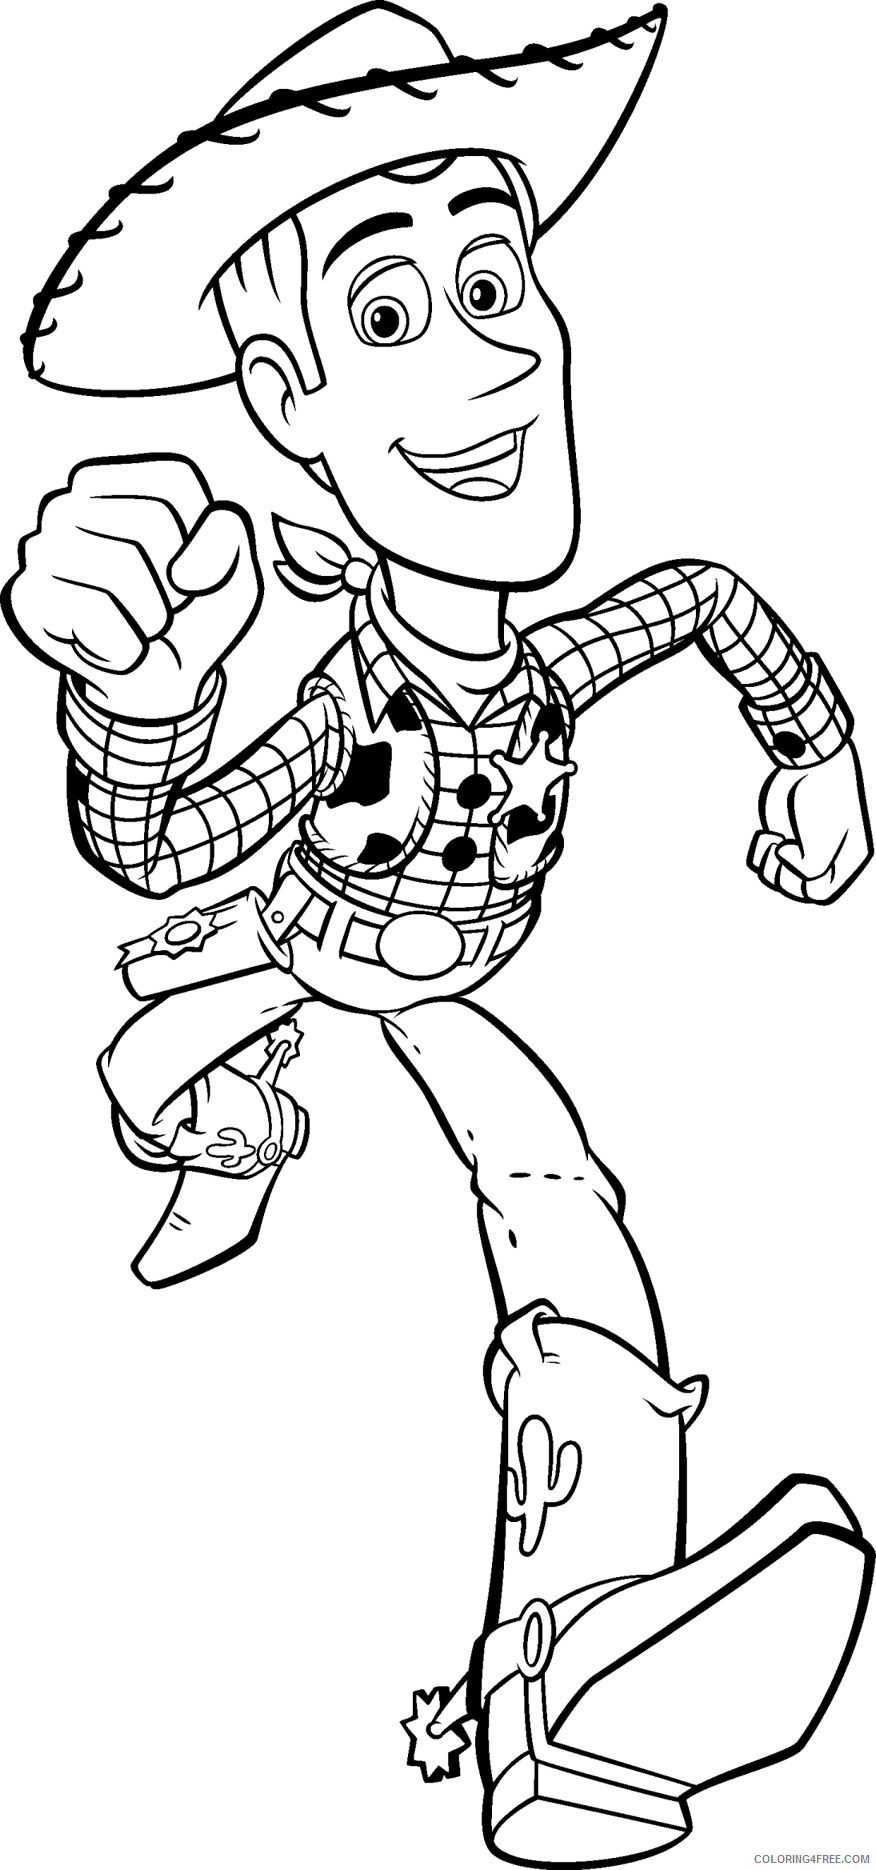 Toy Story Coloring Pages TV Film Toy Story Printable 2020 10469 Coloring4free